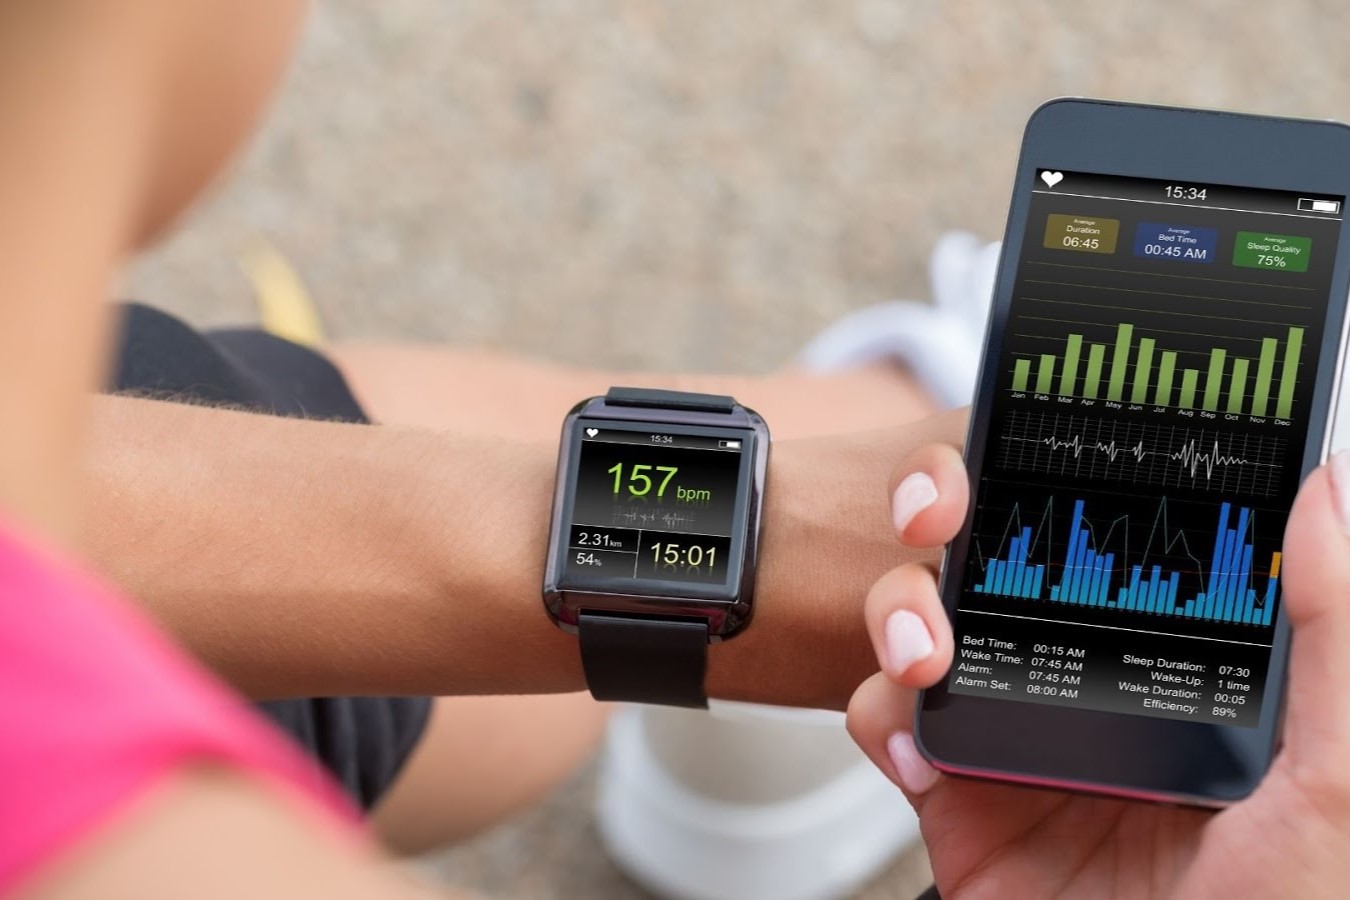 Stress Tracking On Smartwatches: Understanding The Metrics